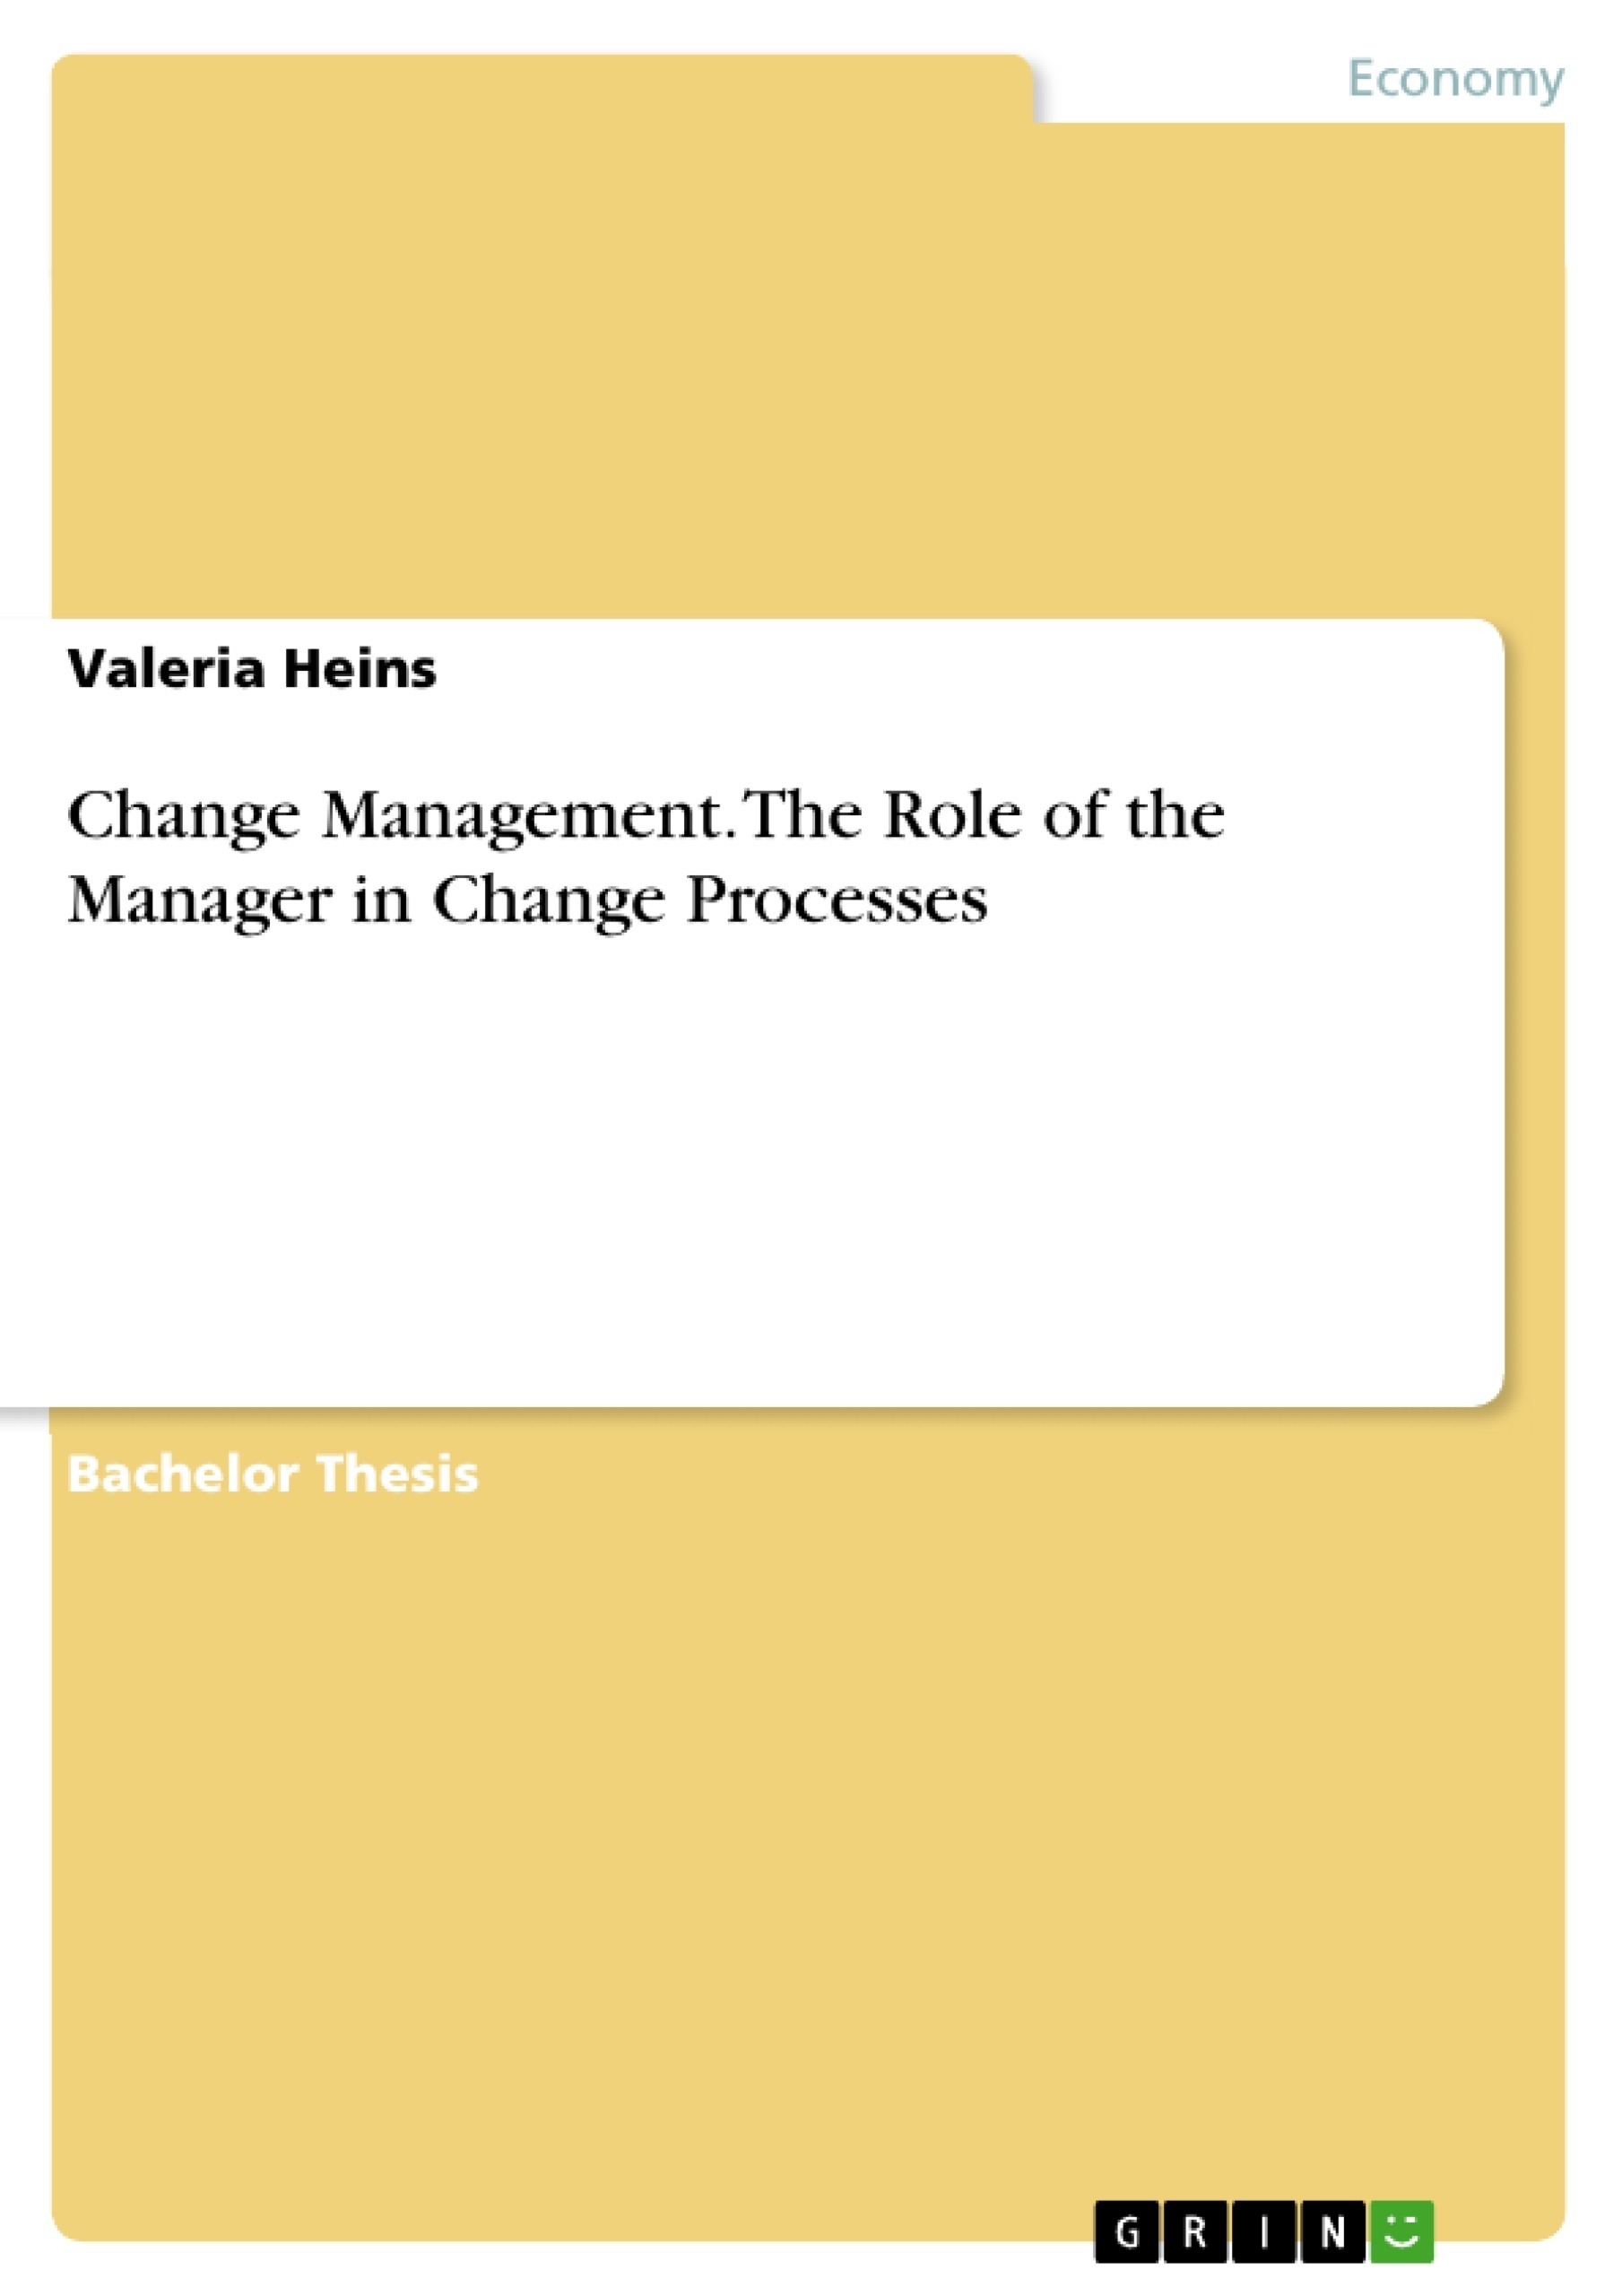 Title: Change Management. The Role of the Manager in Change Processes